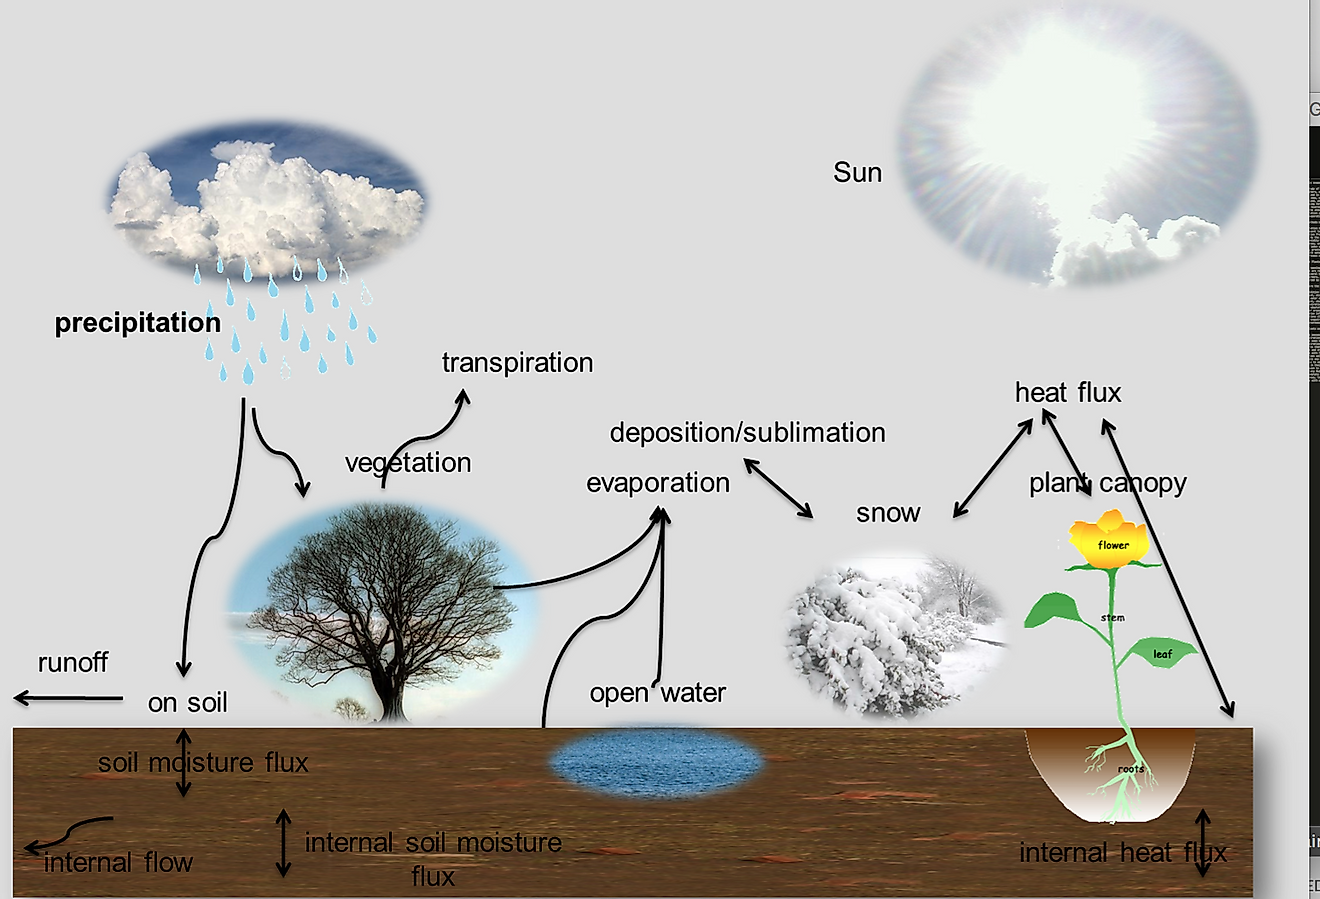 Evapotranspiration is an Integral Part of the Hydrological Cycle